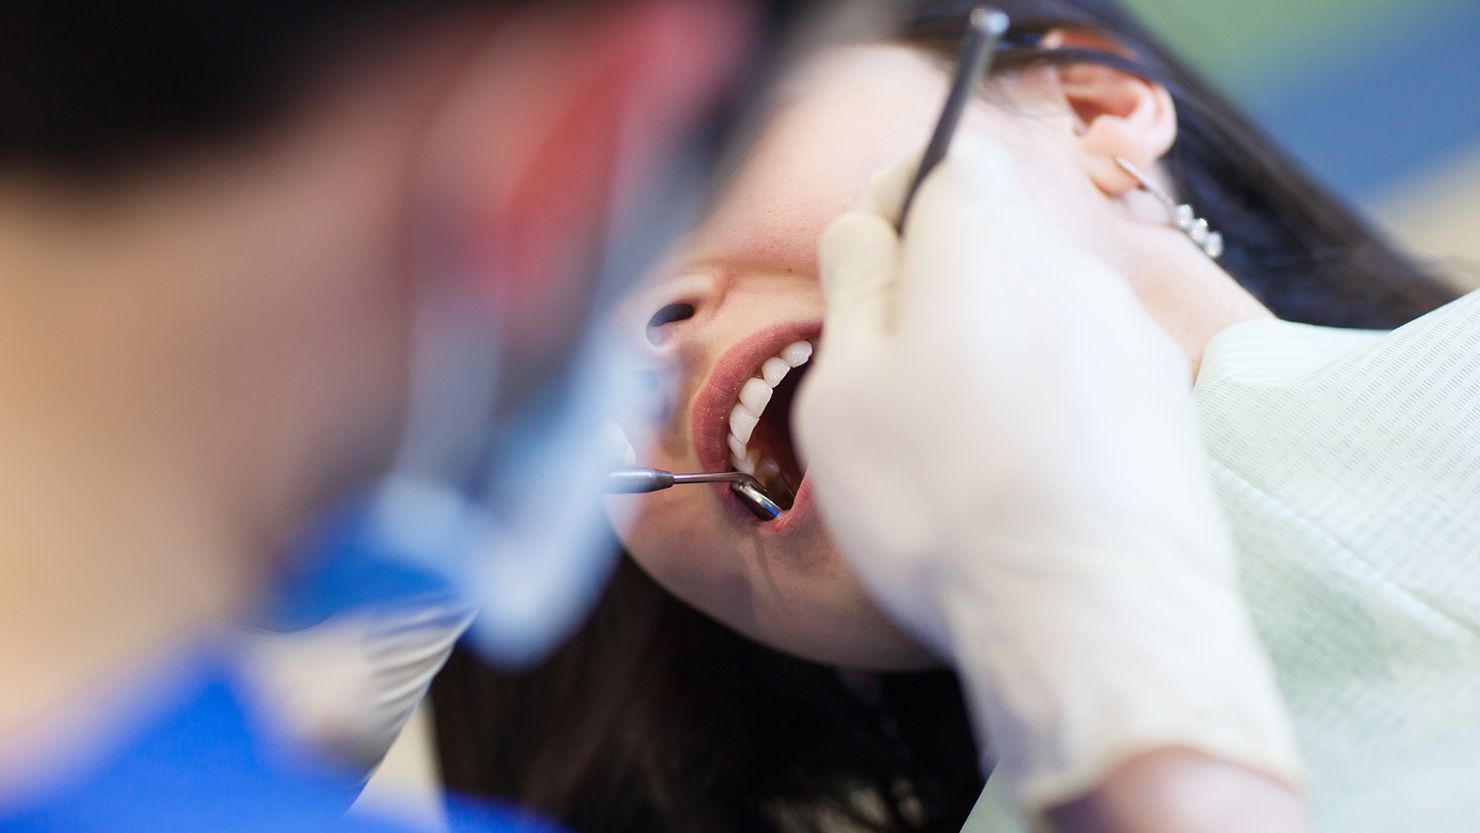 The FDA warned Thursday that dental amalgam filling may cause health issues for some high-risk groups.